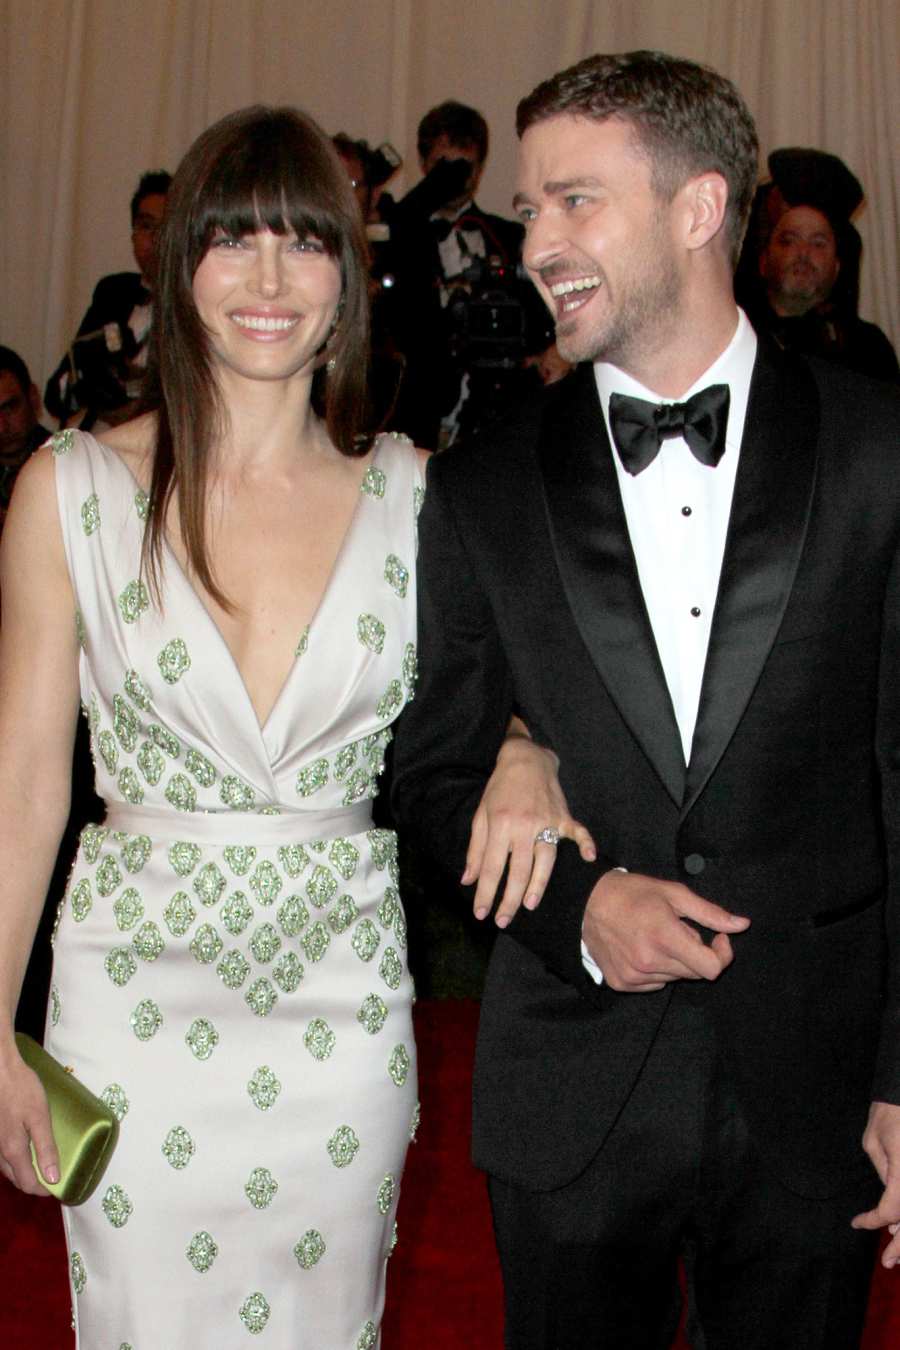 Jessica Biel and Justin Timberlake How Celebrity Newlyweds Spent Their 1st Christmas Together